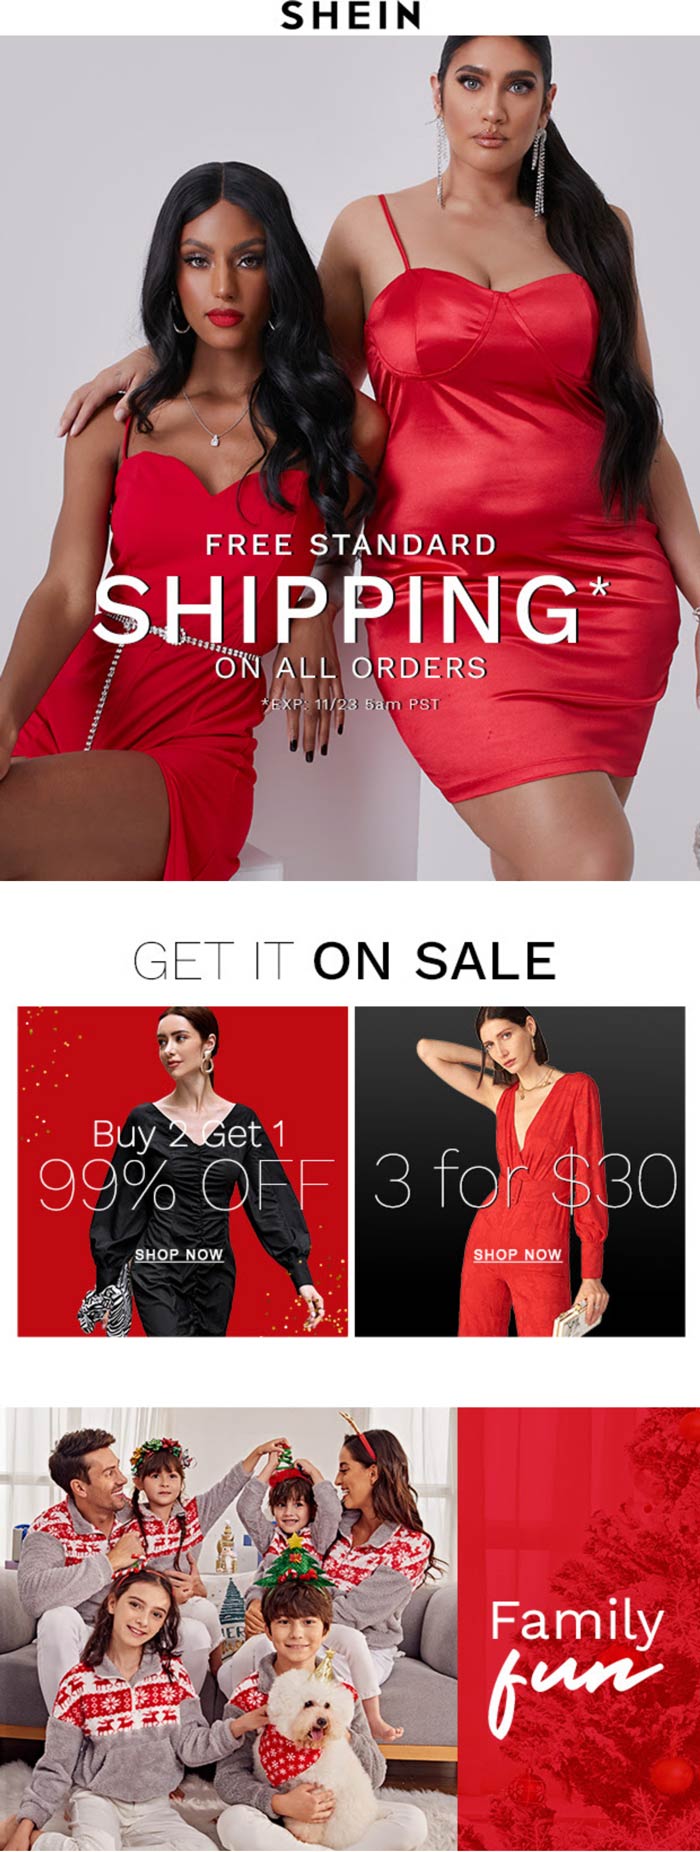 SHEIN stores Coupon  3rd item 99% off + 3 for $30 at SHEIN #shein 